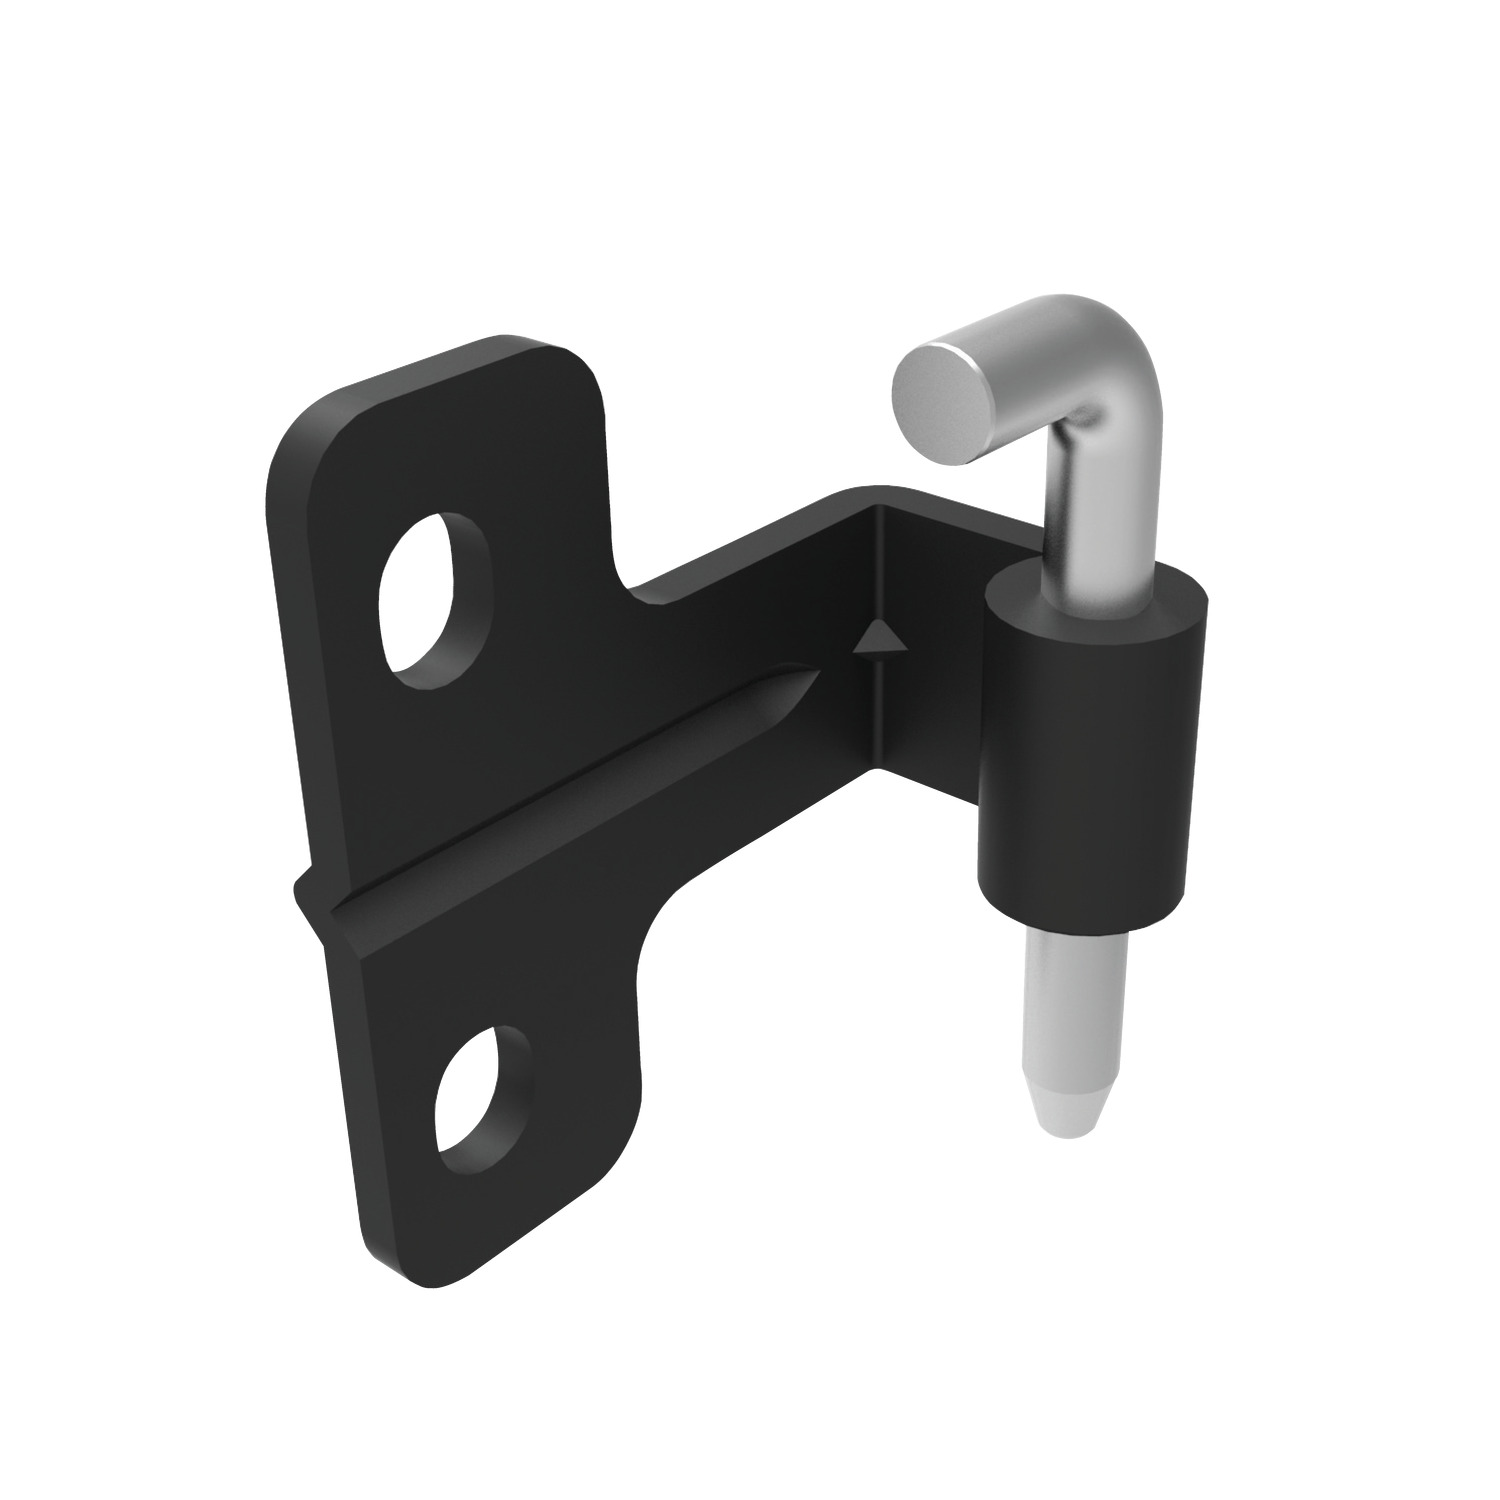 S2176.AW0021 Concealed Pivot Hinges weld and oval head screw